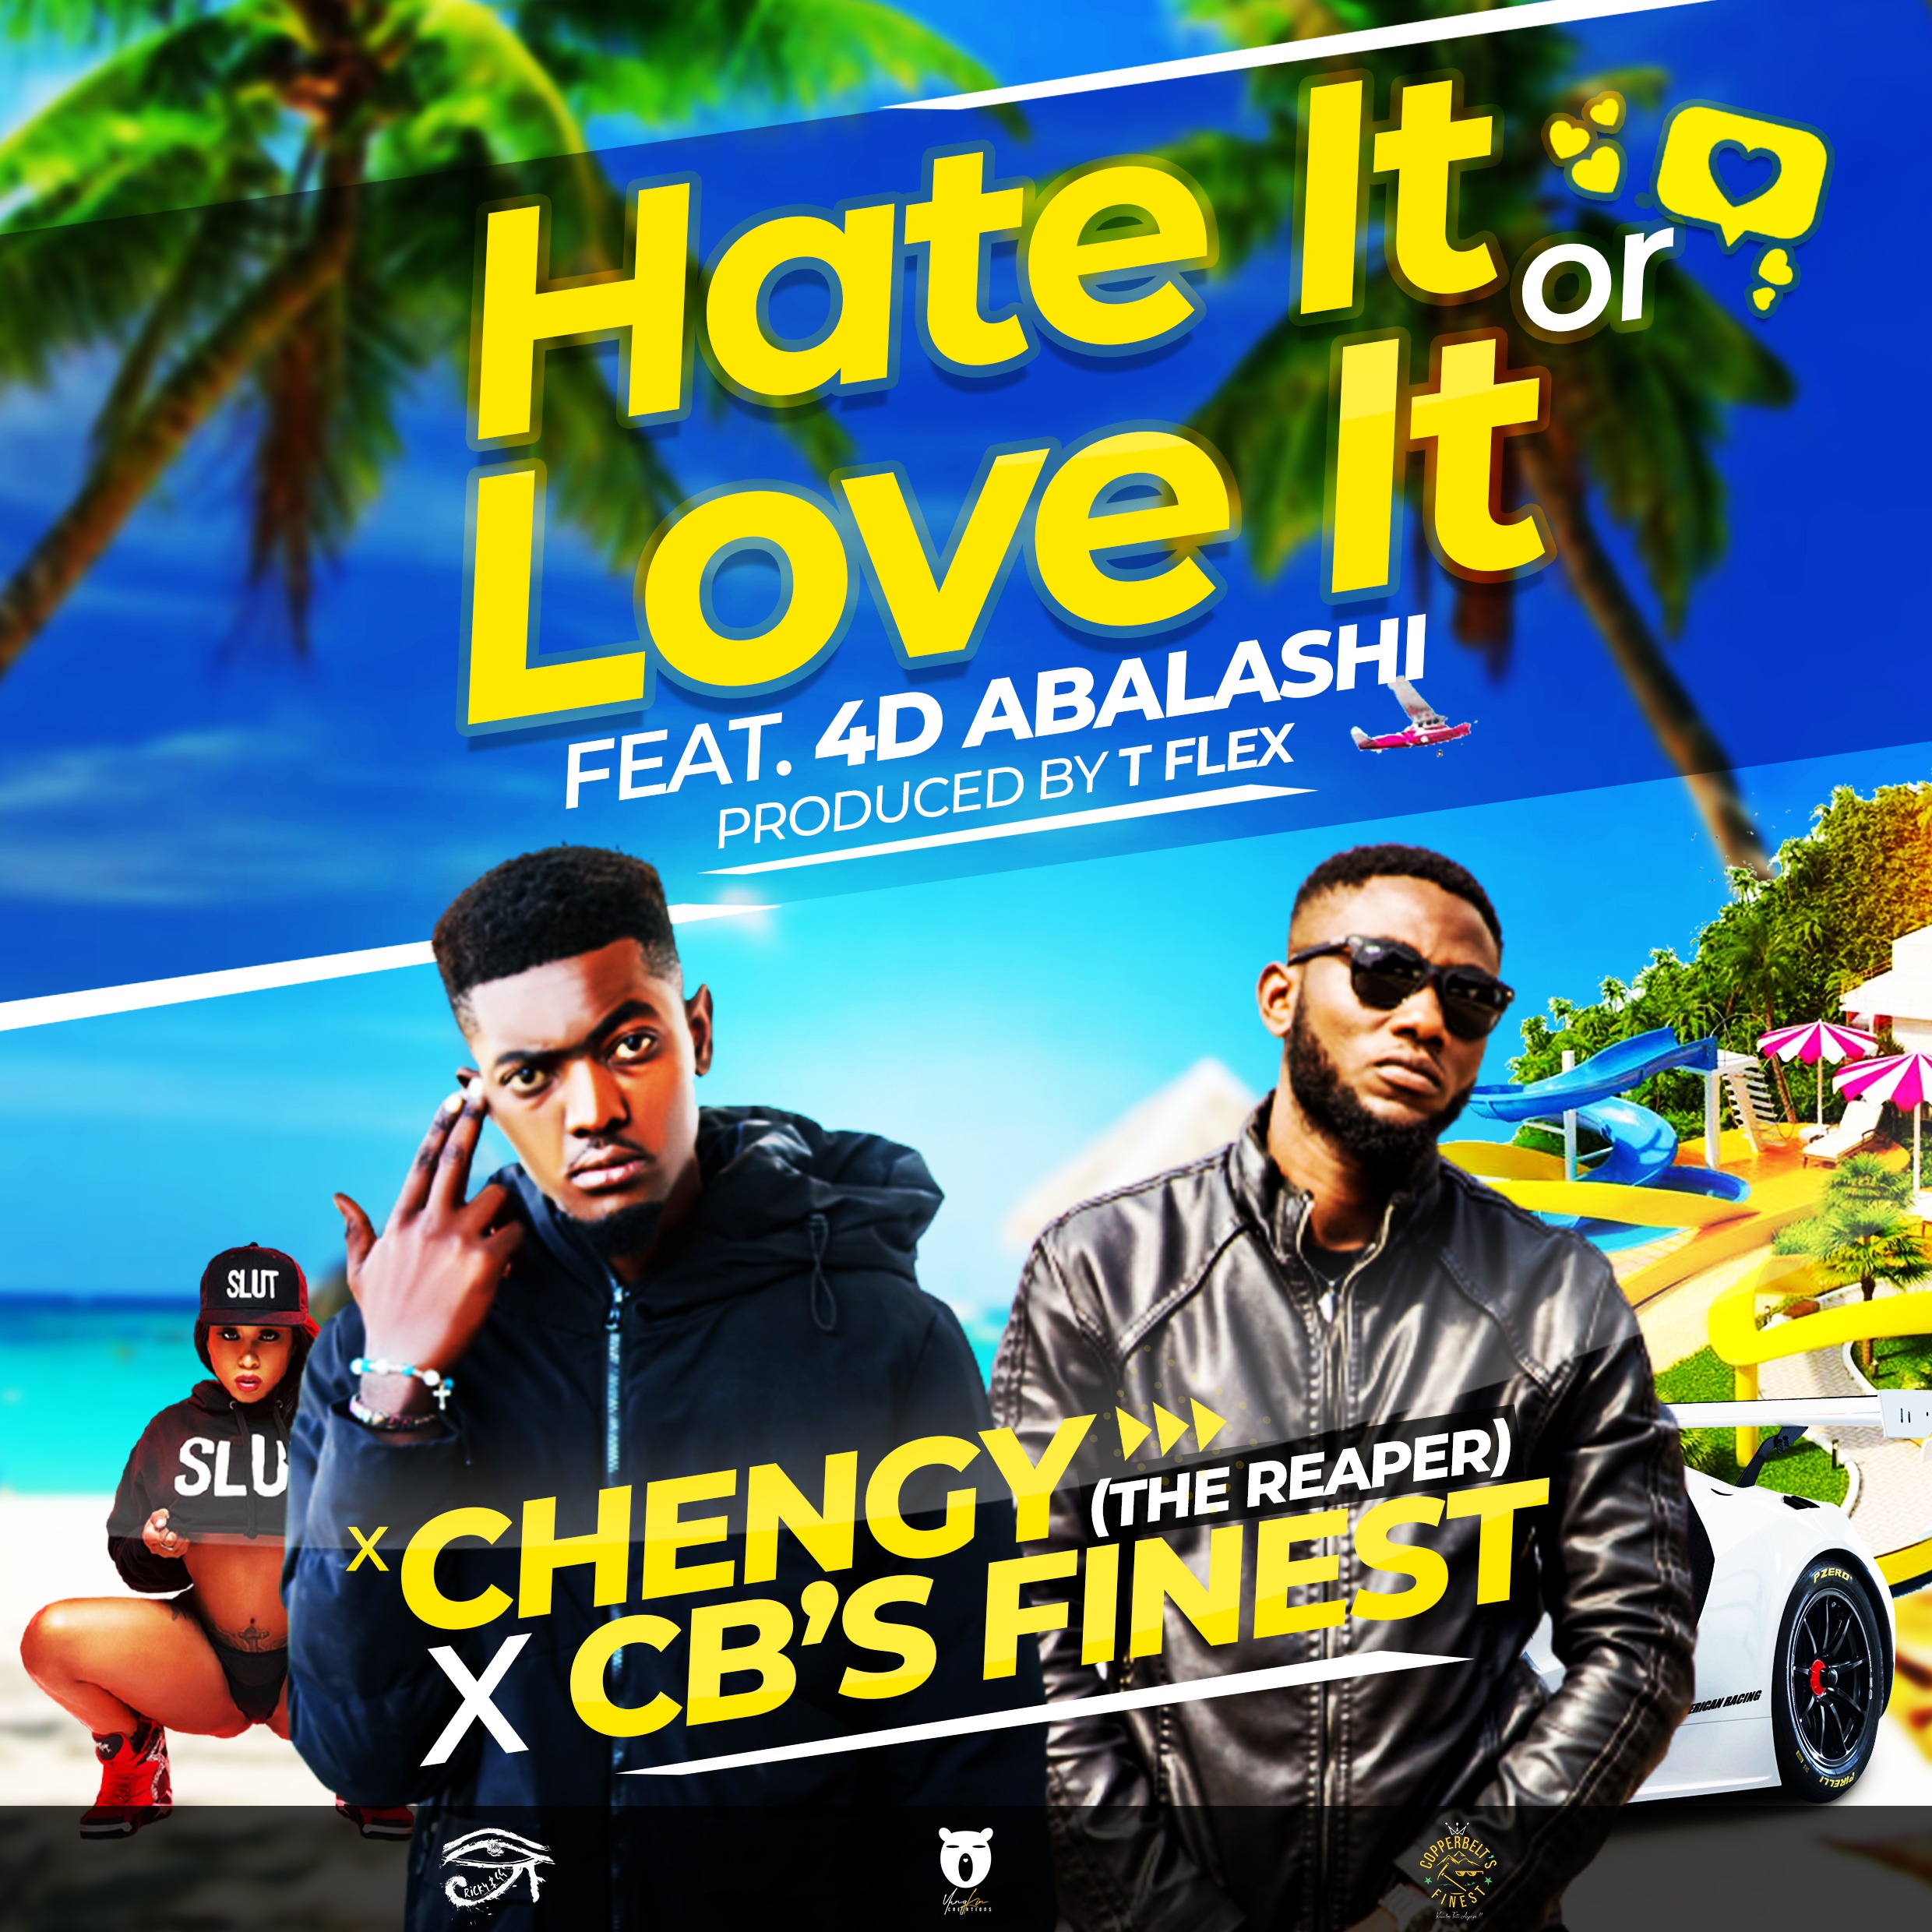 Chengy x CB's Finst FT 4D Abalashi - Hate it Or Love it